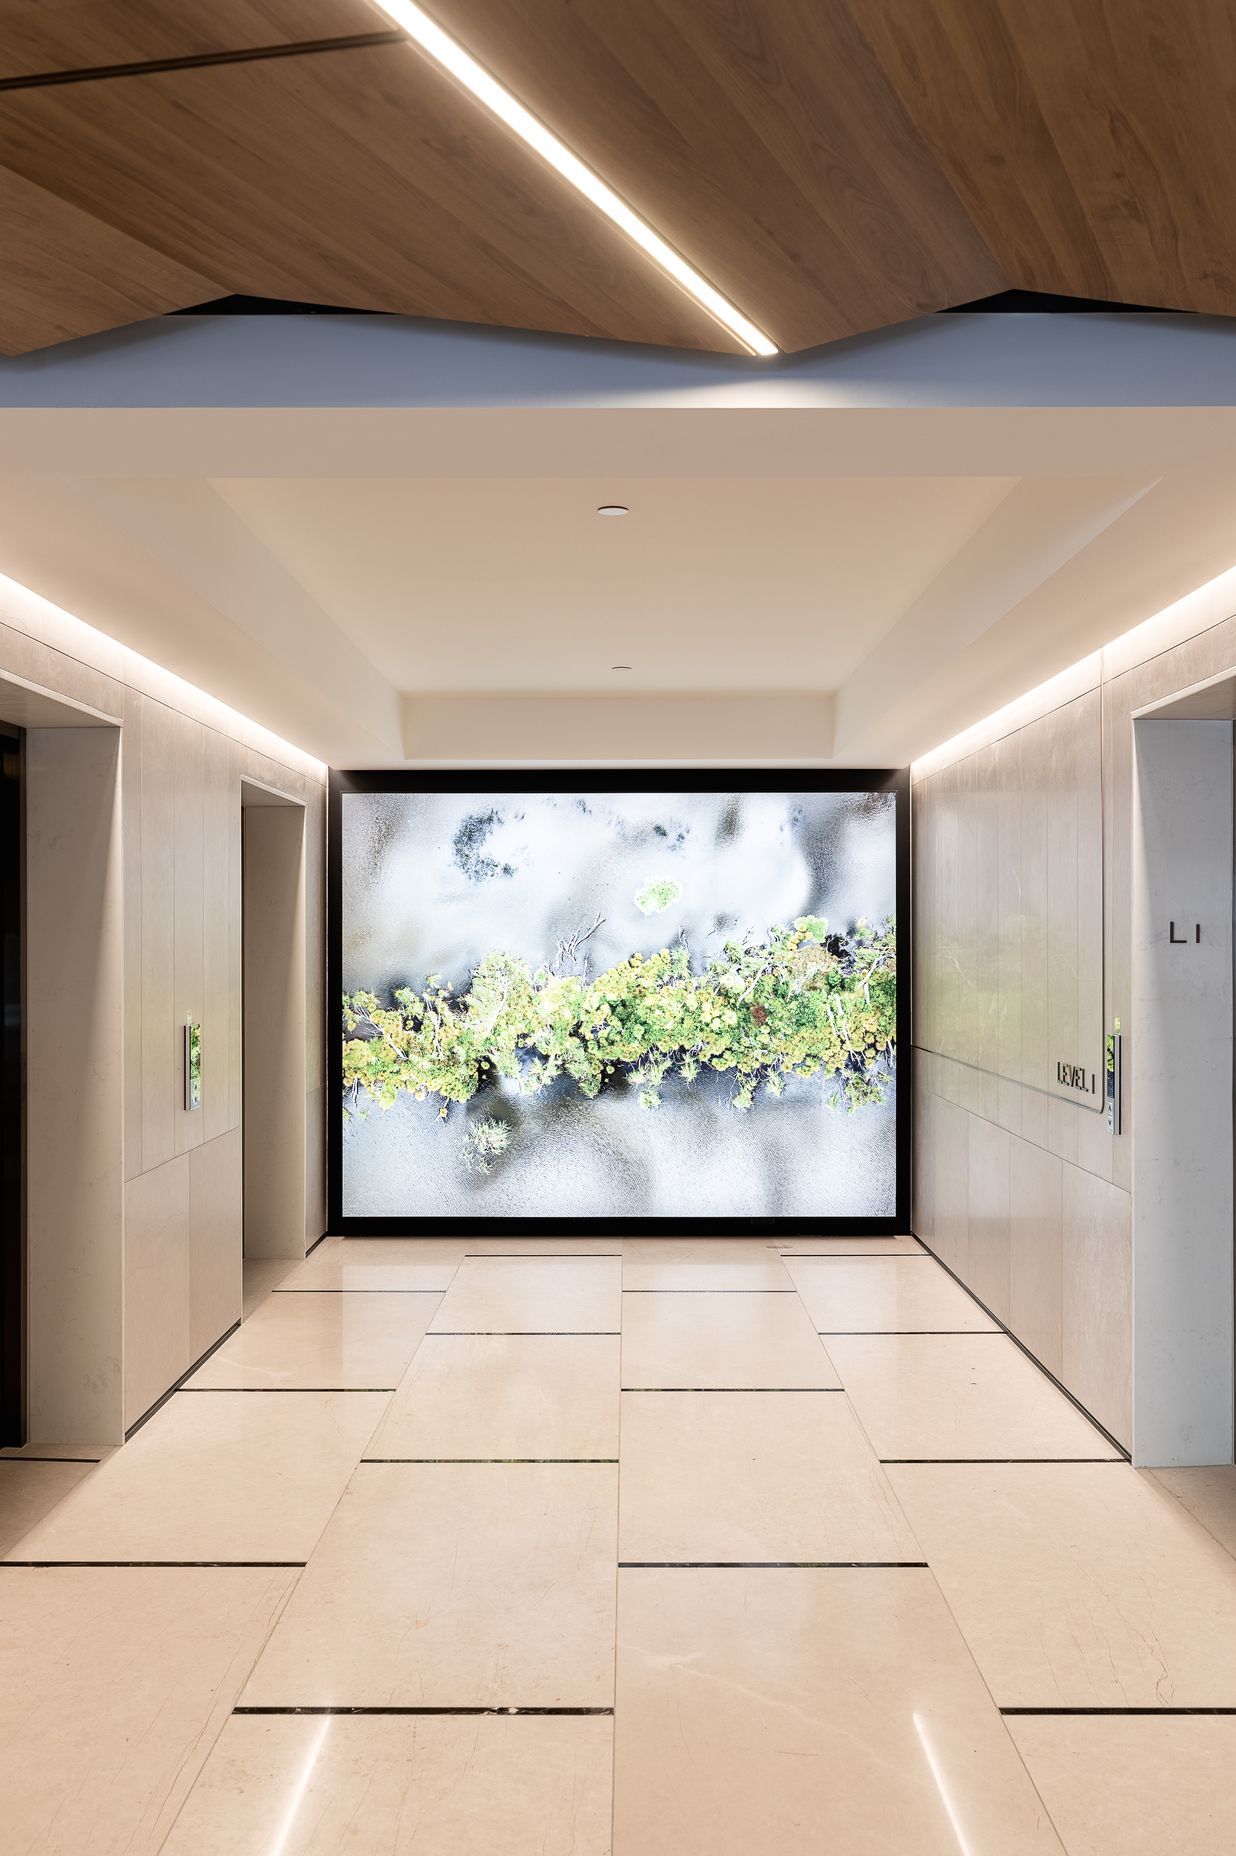 An artwork by Jae Hoon Lee featured in one of the Pinnacle Tower lift spaces.